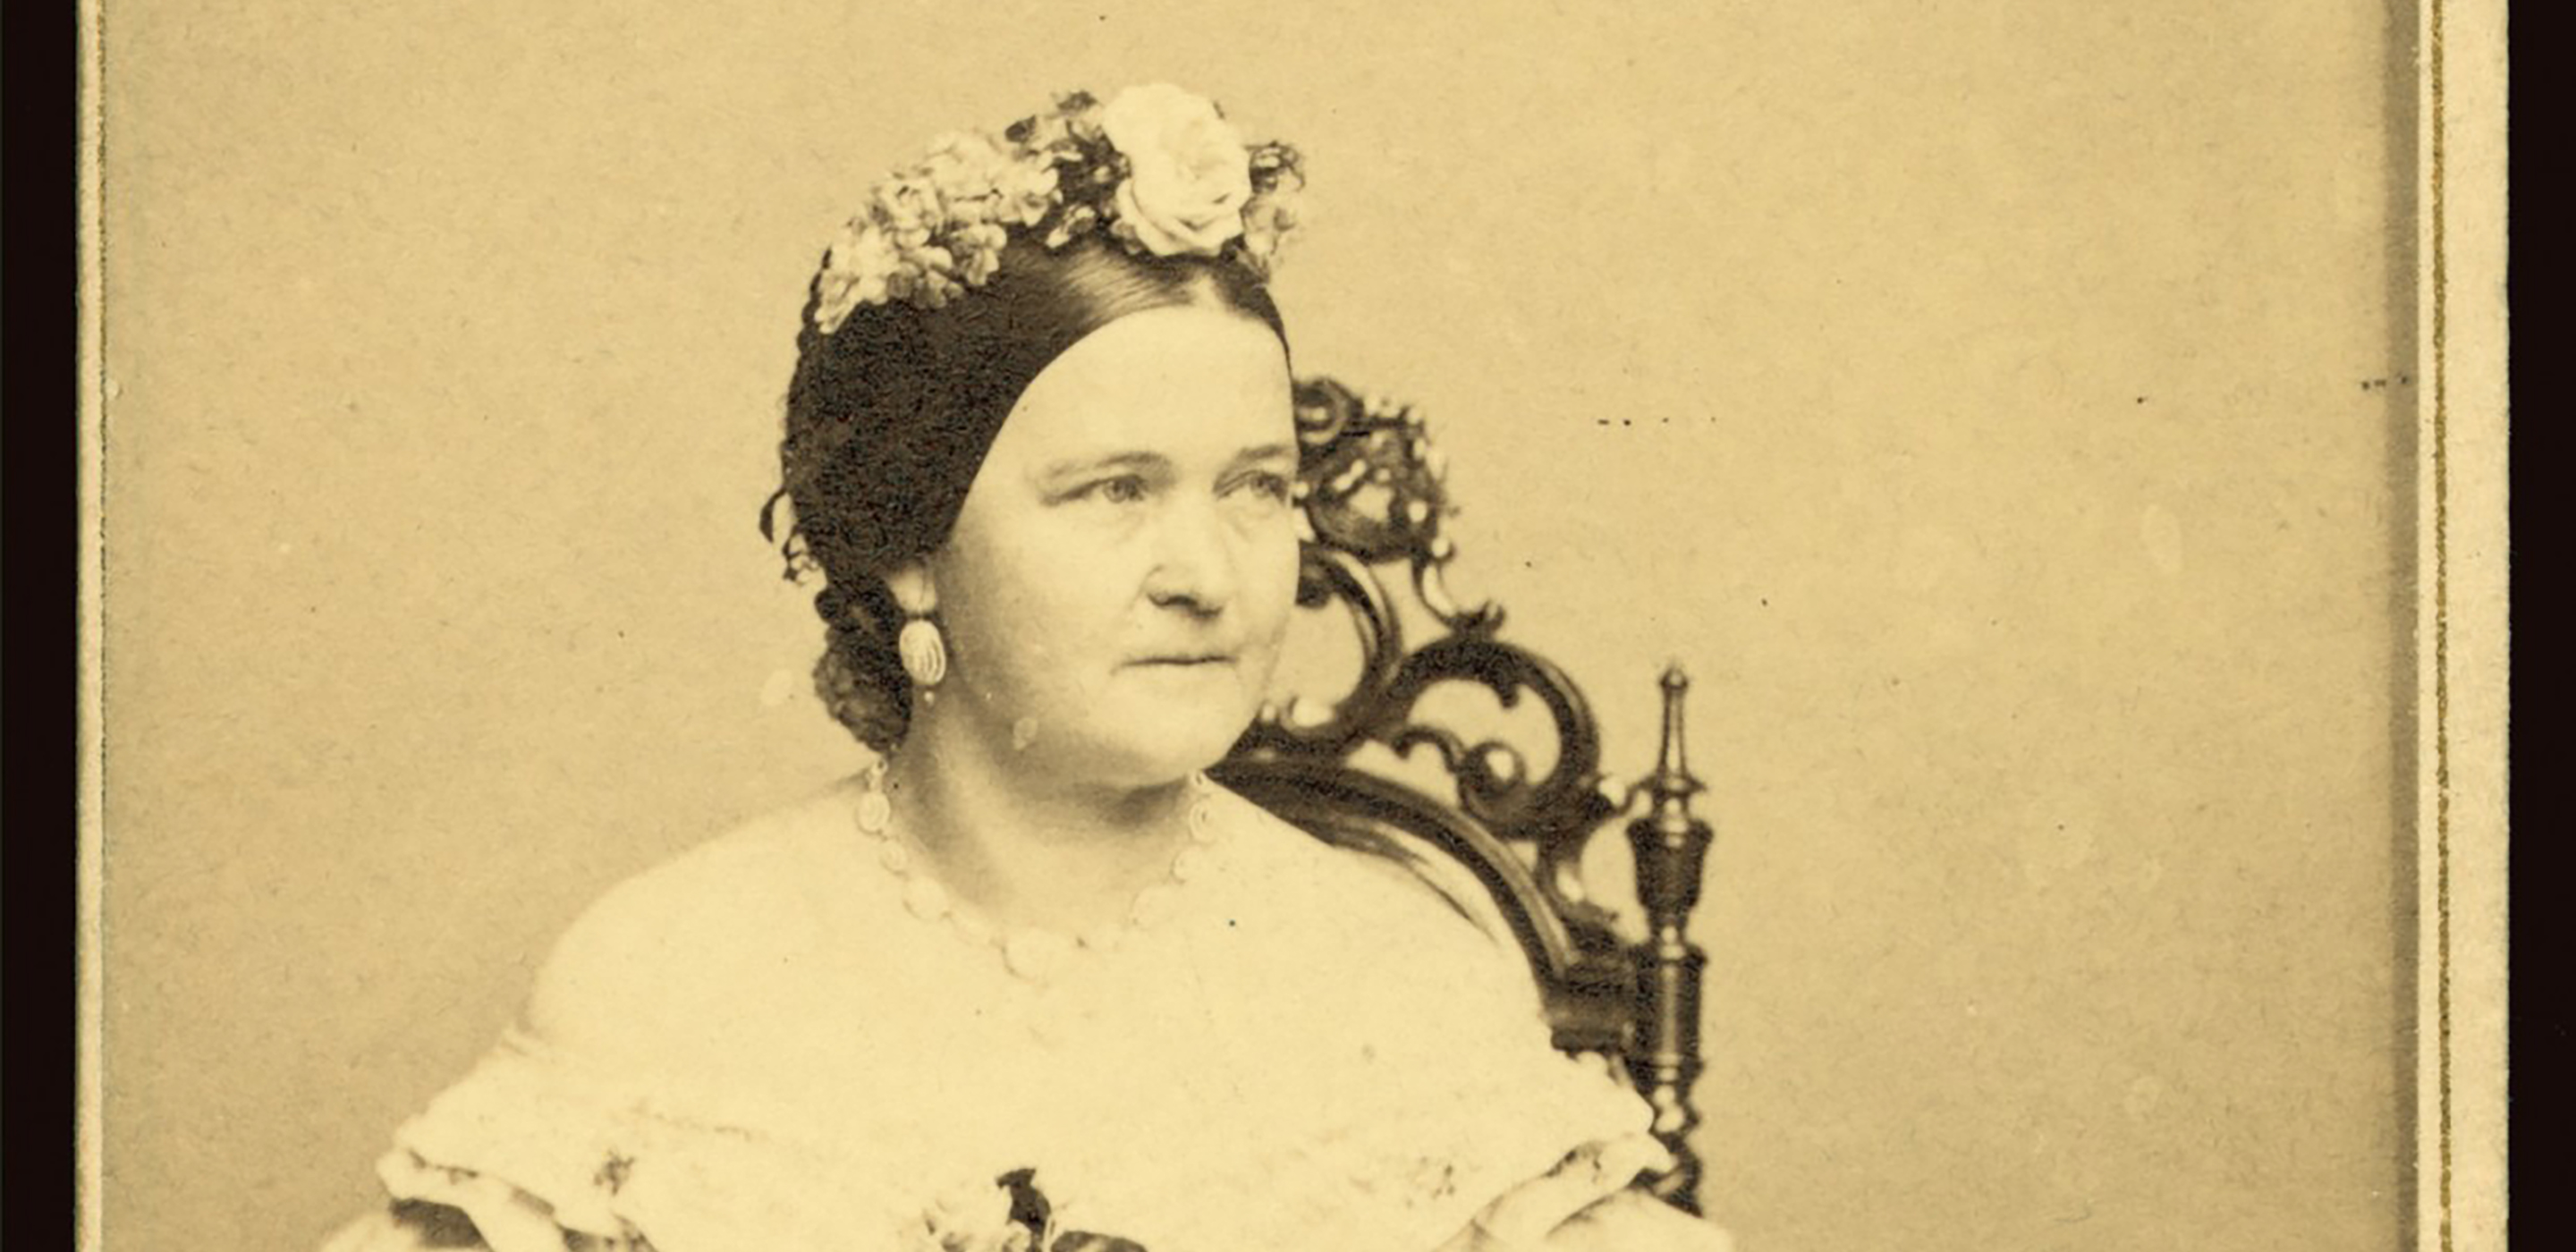 Sepia photograph of Mary Todd Lincoln seated in a chair, wearing a floral headdress and a white dress.